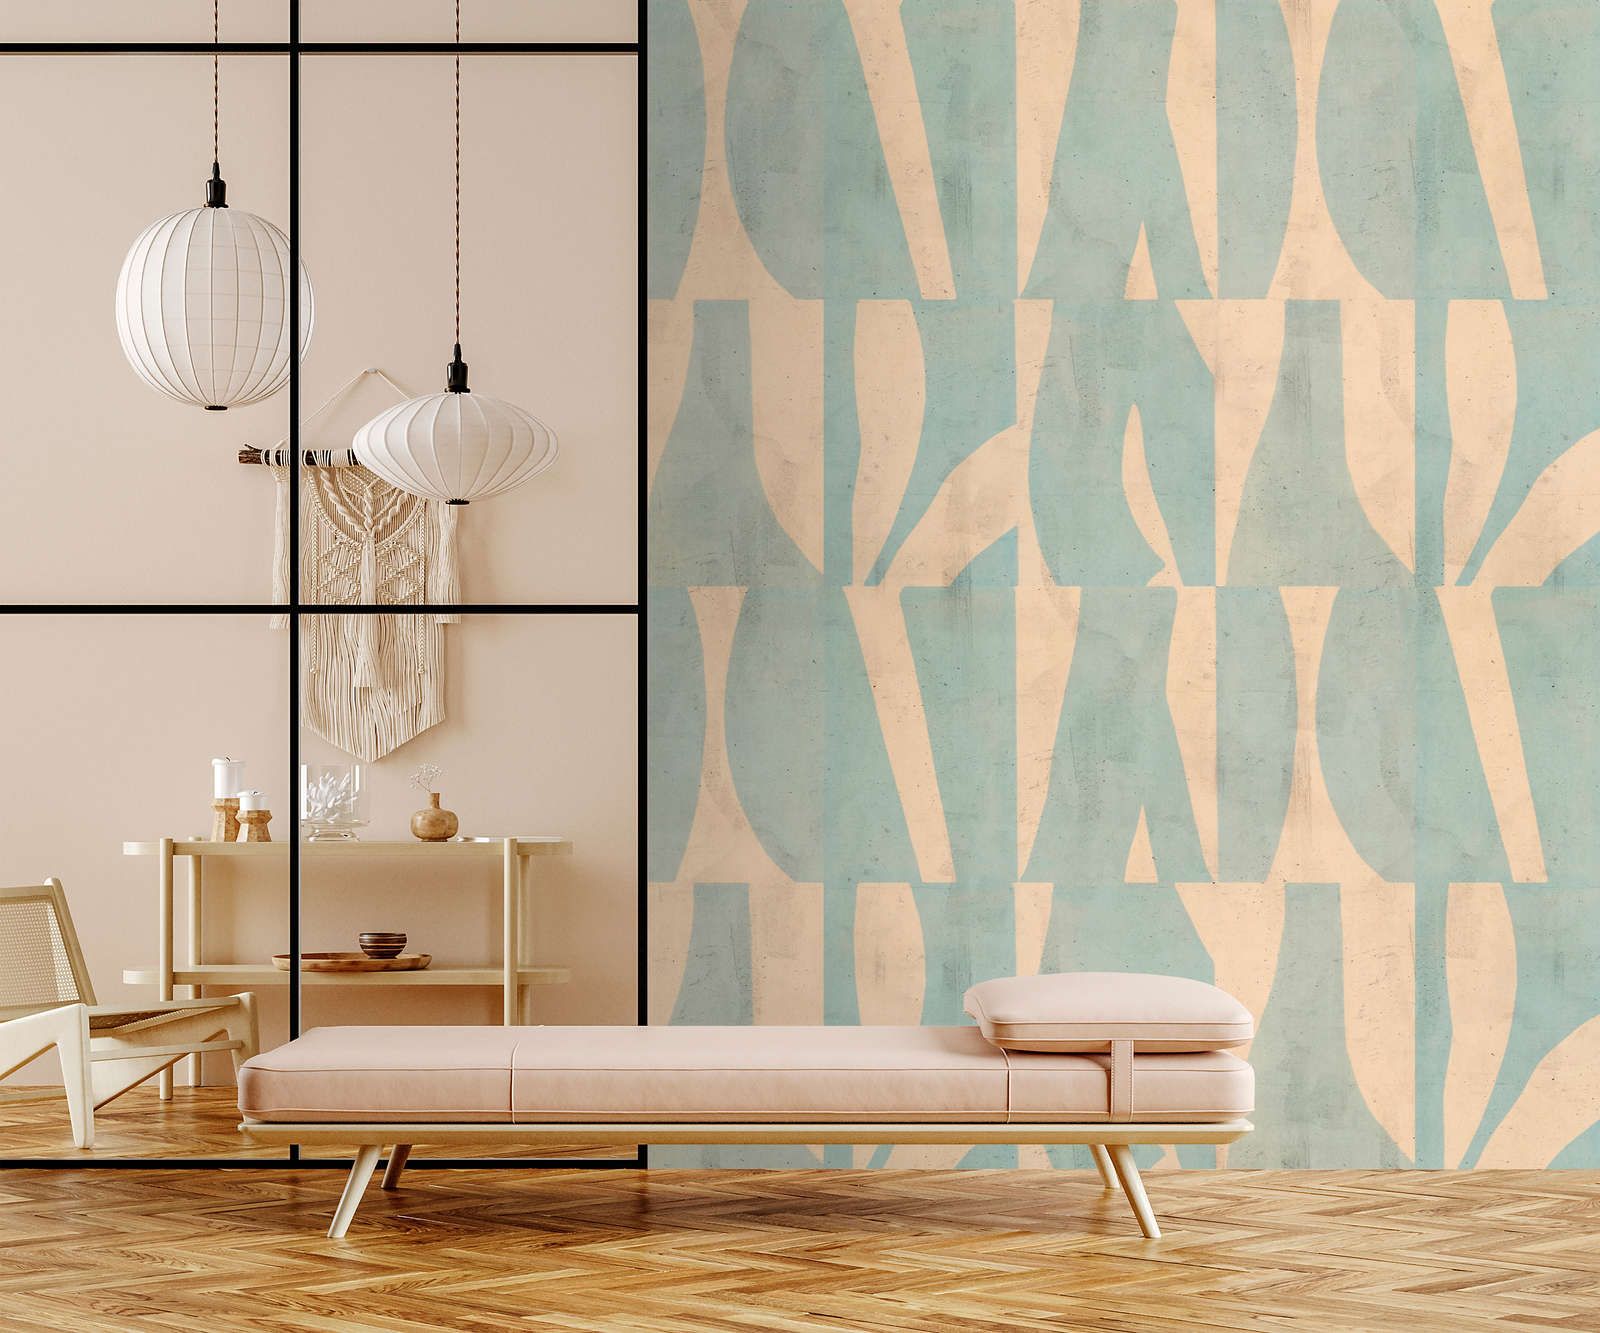             Photo wallpaper »laila« - Graphic pattern on concrete plaster texture - Beige, mint green | Smooth, slightly shiny premium non-woven fabric
        